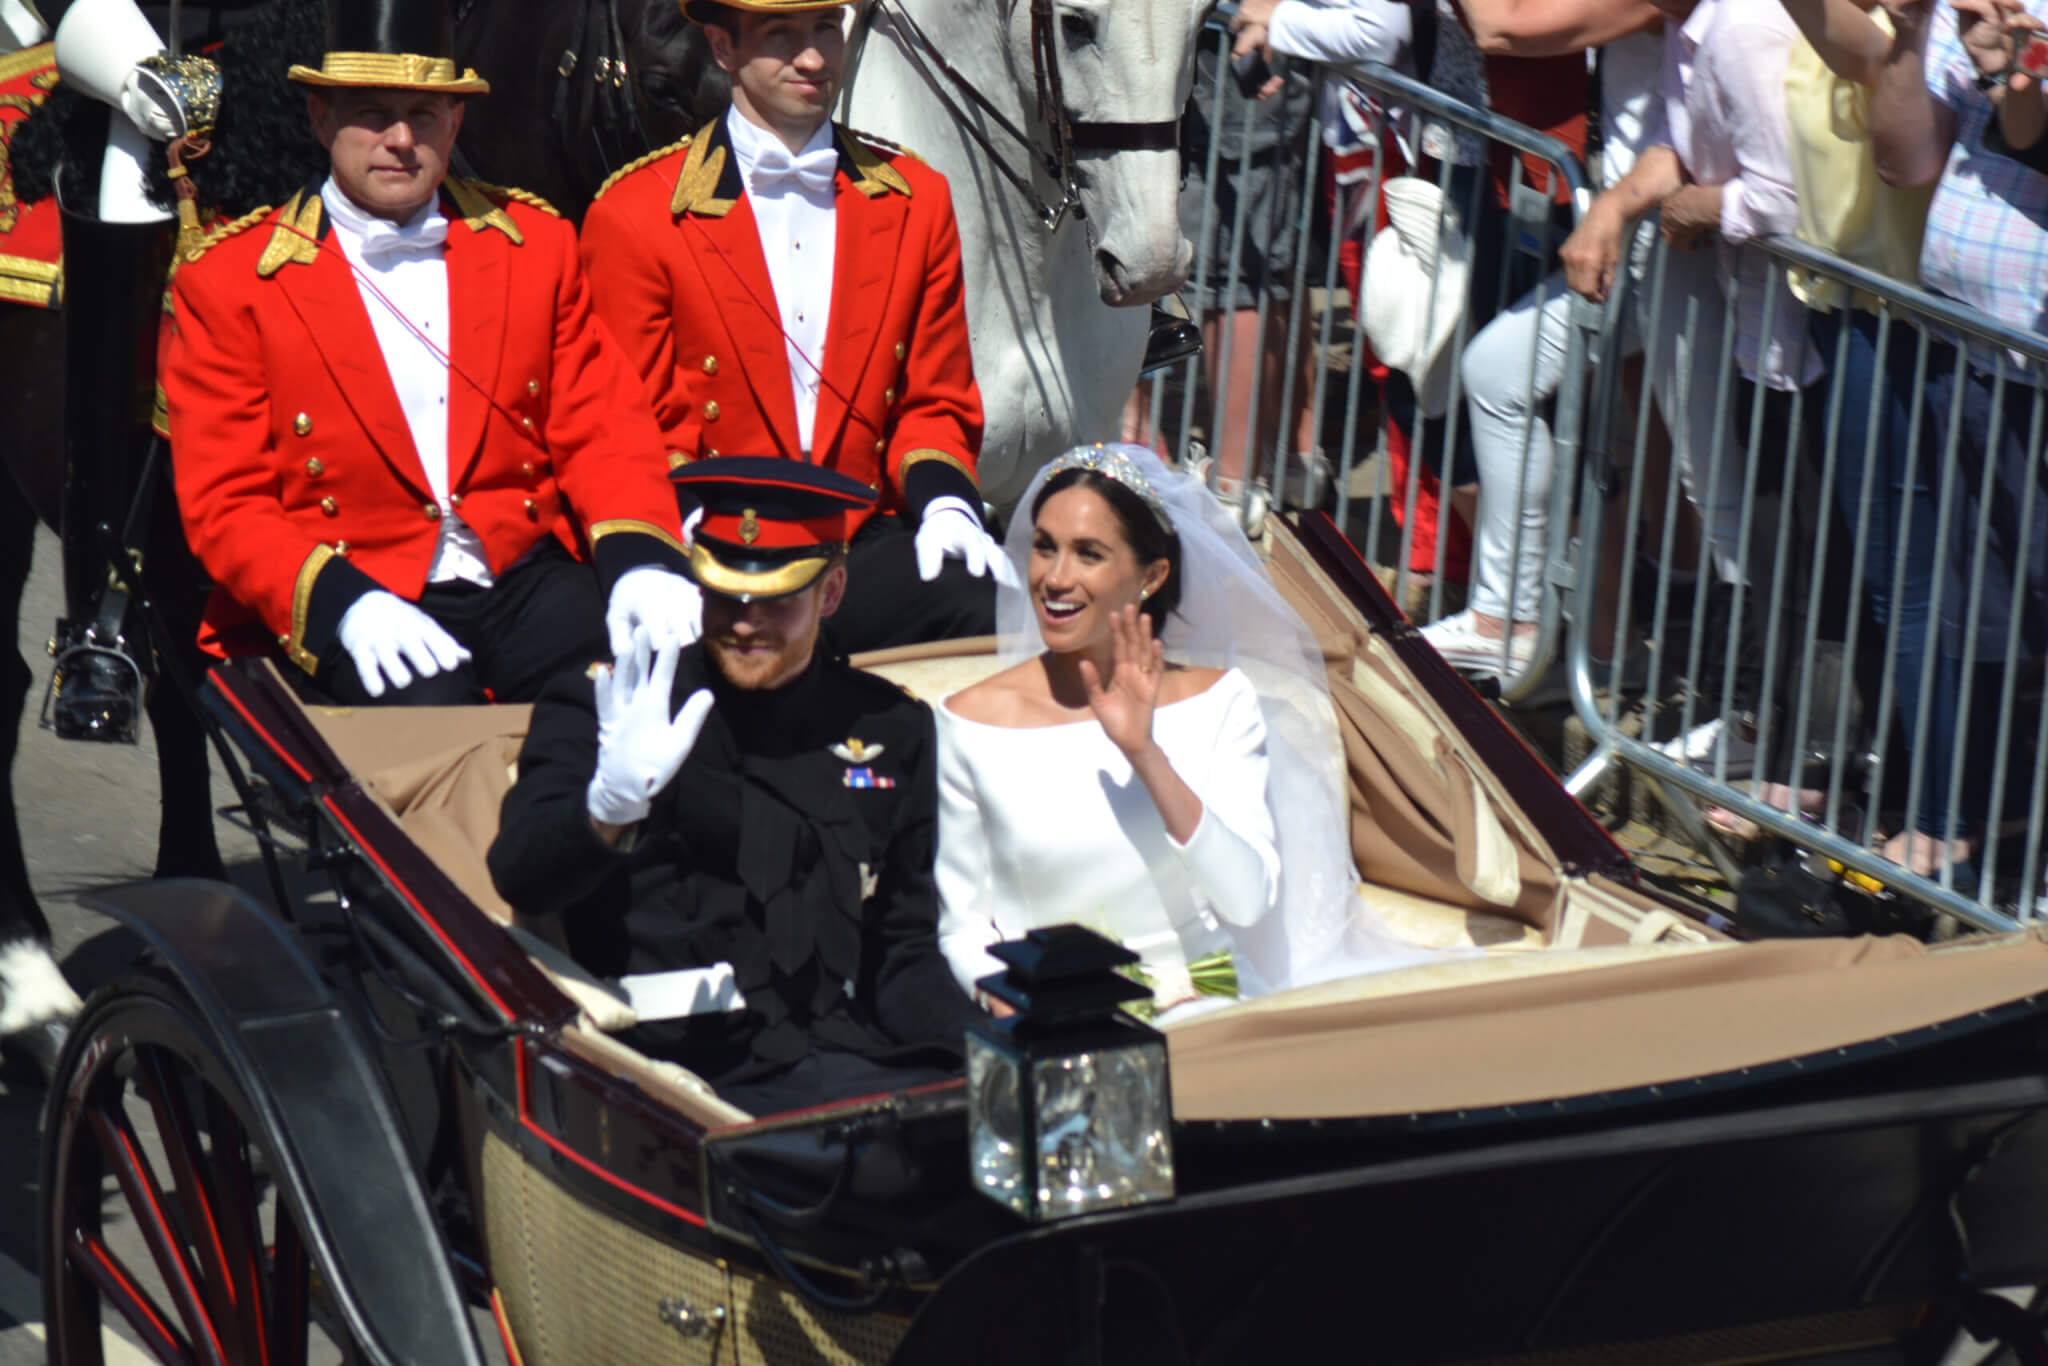 Prince Harry and Megan Markle's wedding in 2018